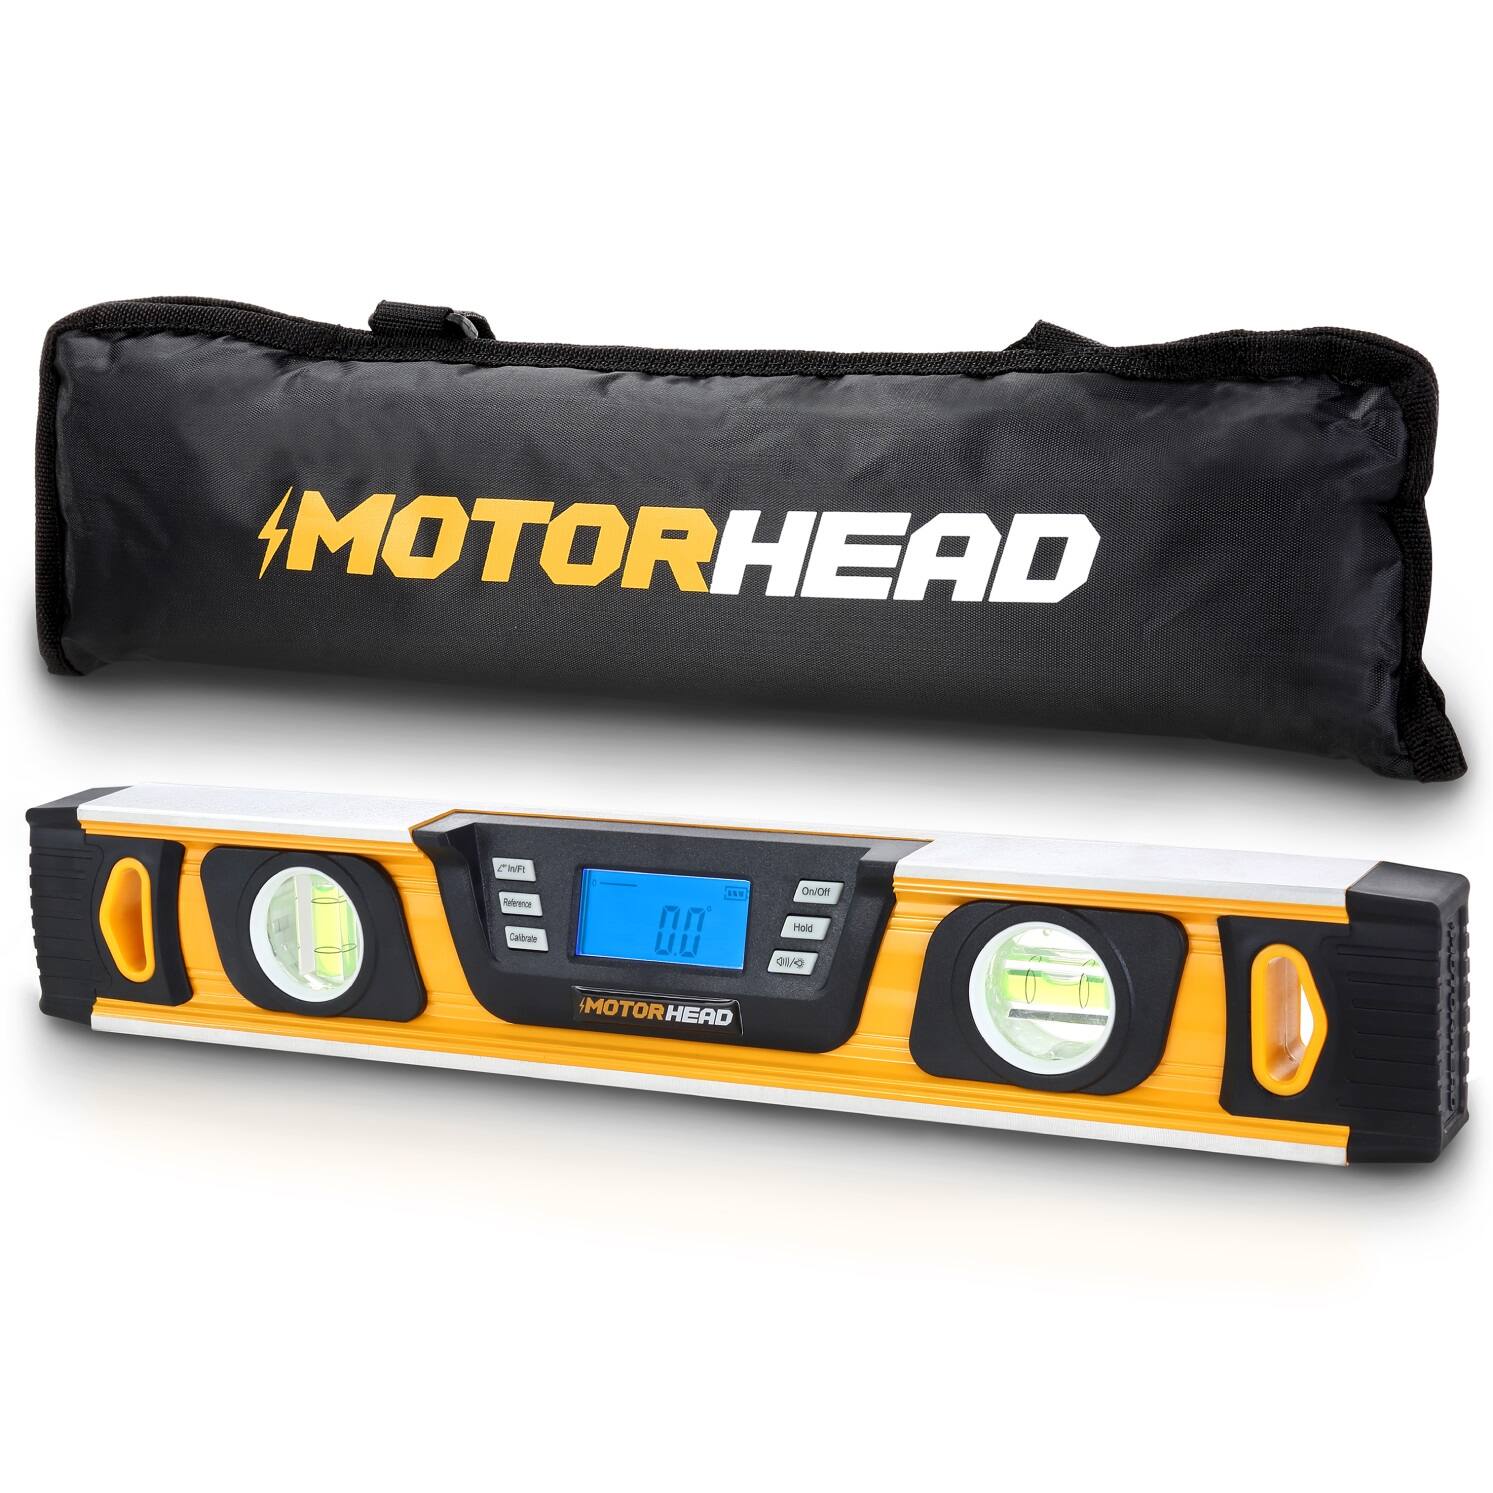 MOTORHEAD 16" Inch Smart Digital LCD Level (Magnetic w/ Batteries, Case Included) for $36.99 + Free Shipping for Prime Members